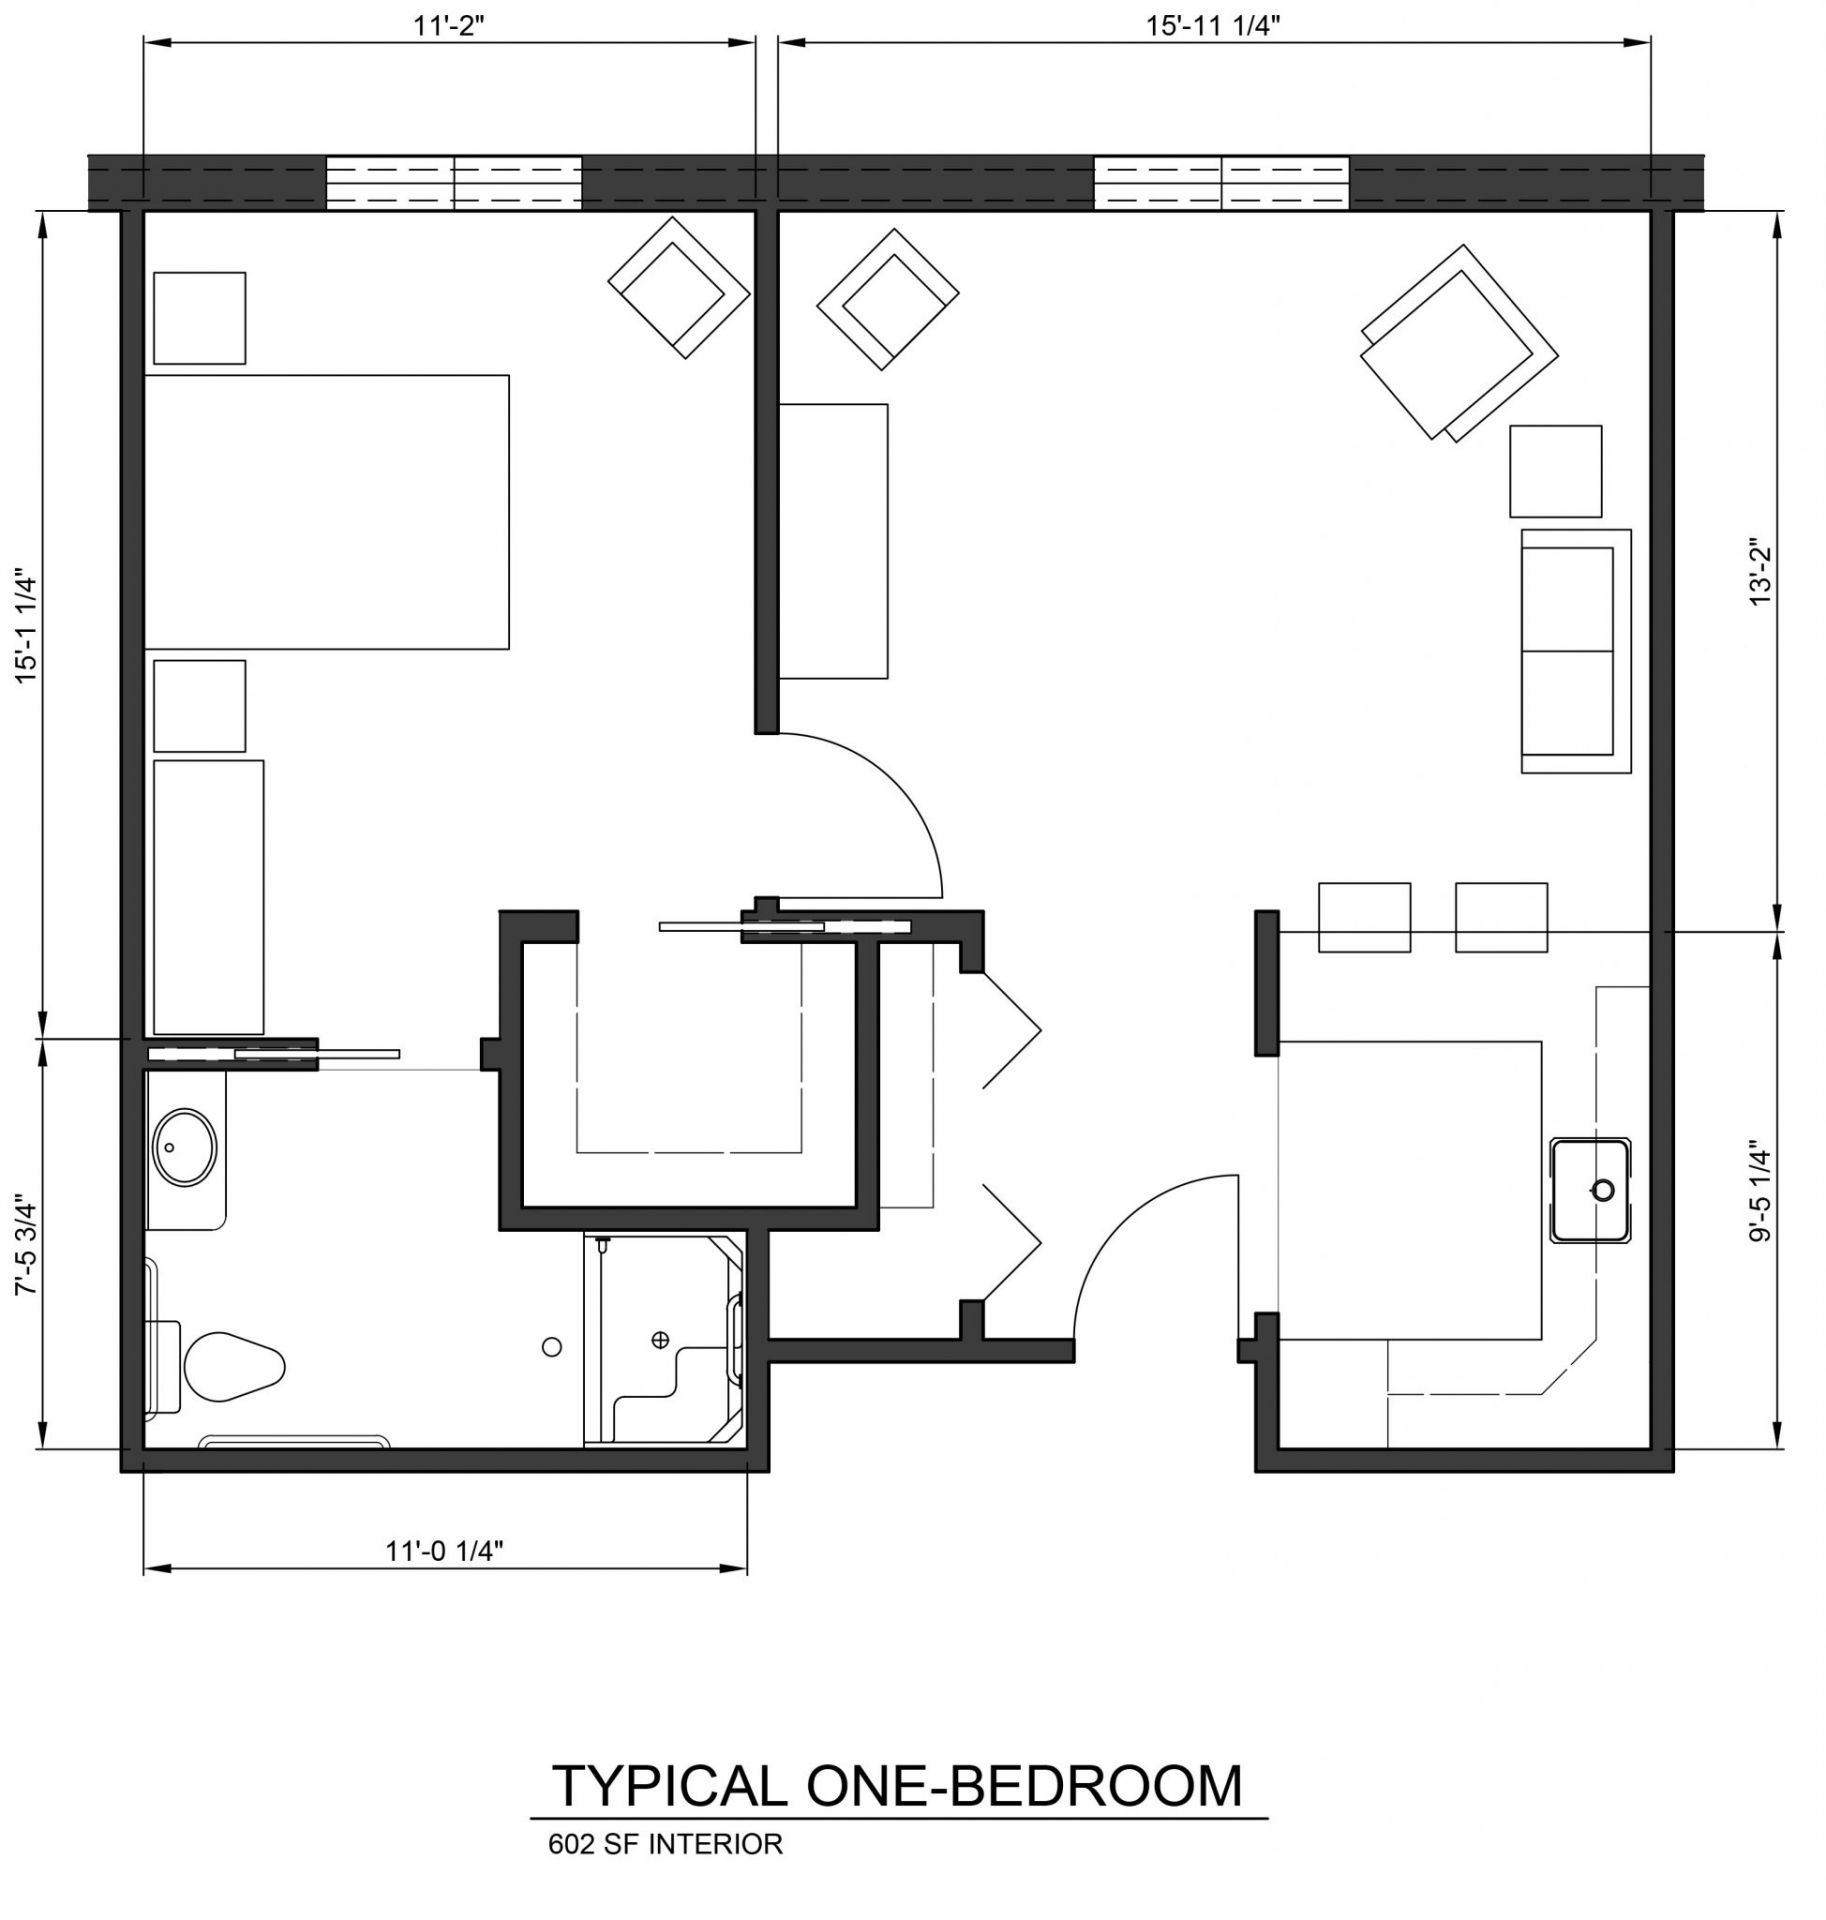 Typical One Bedroom